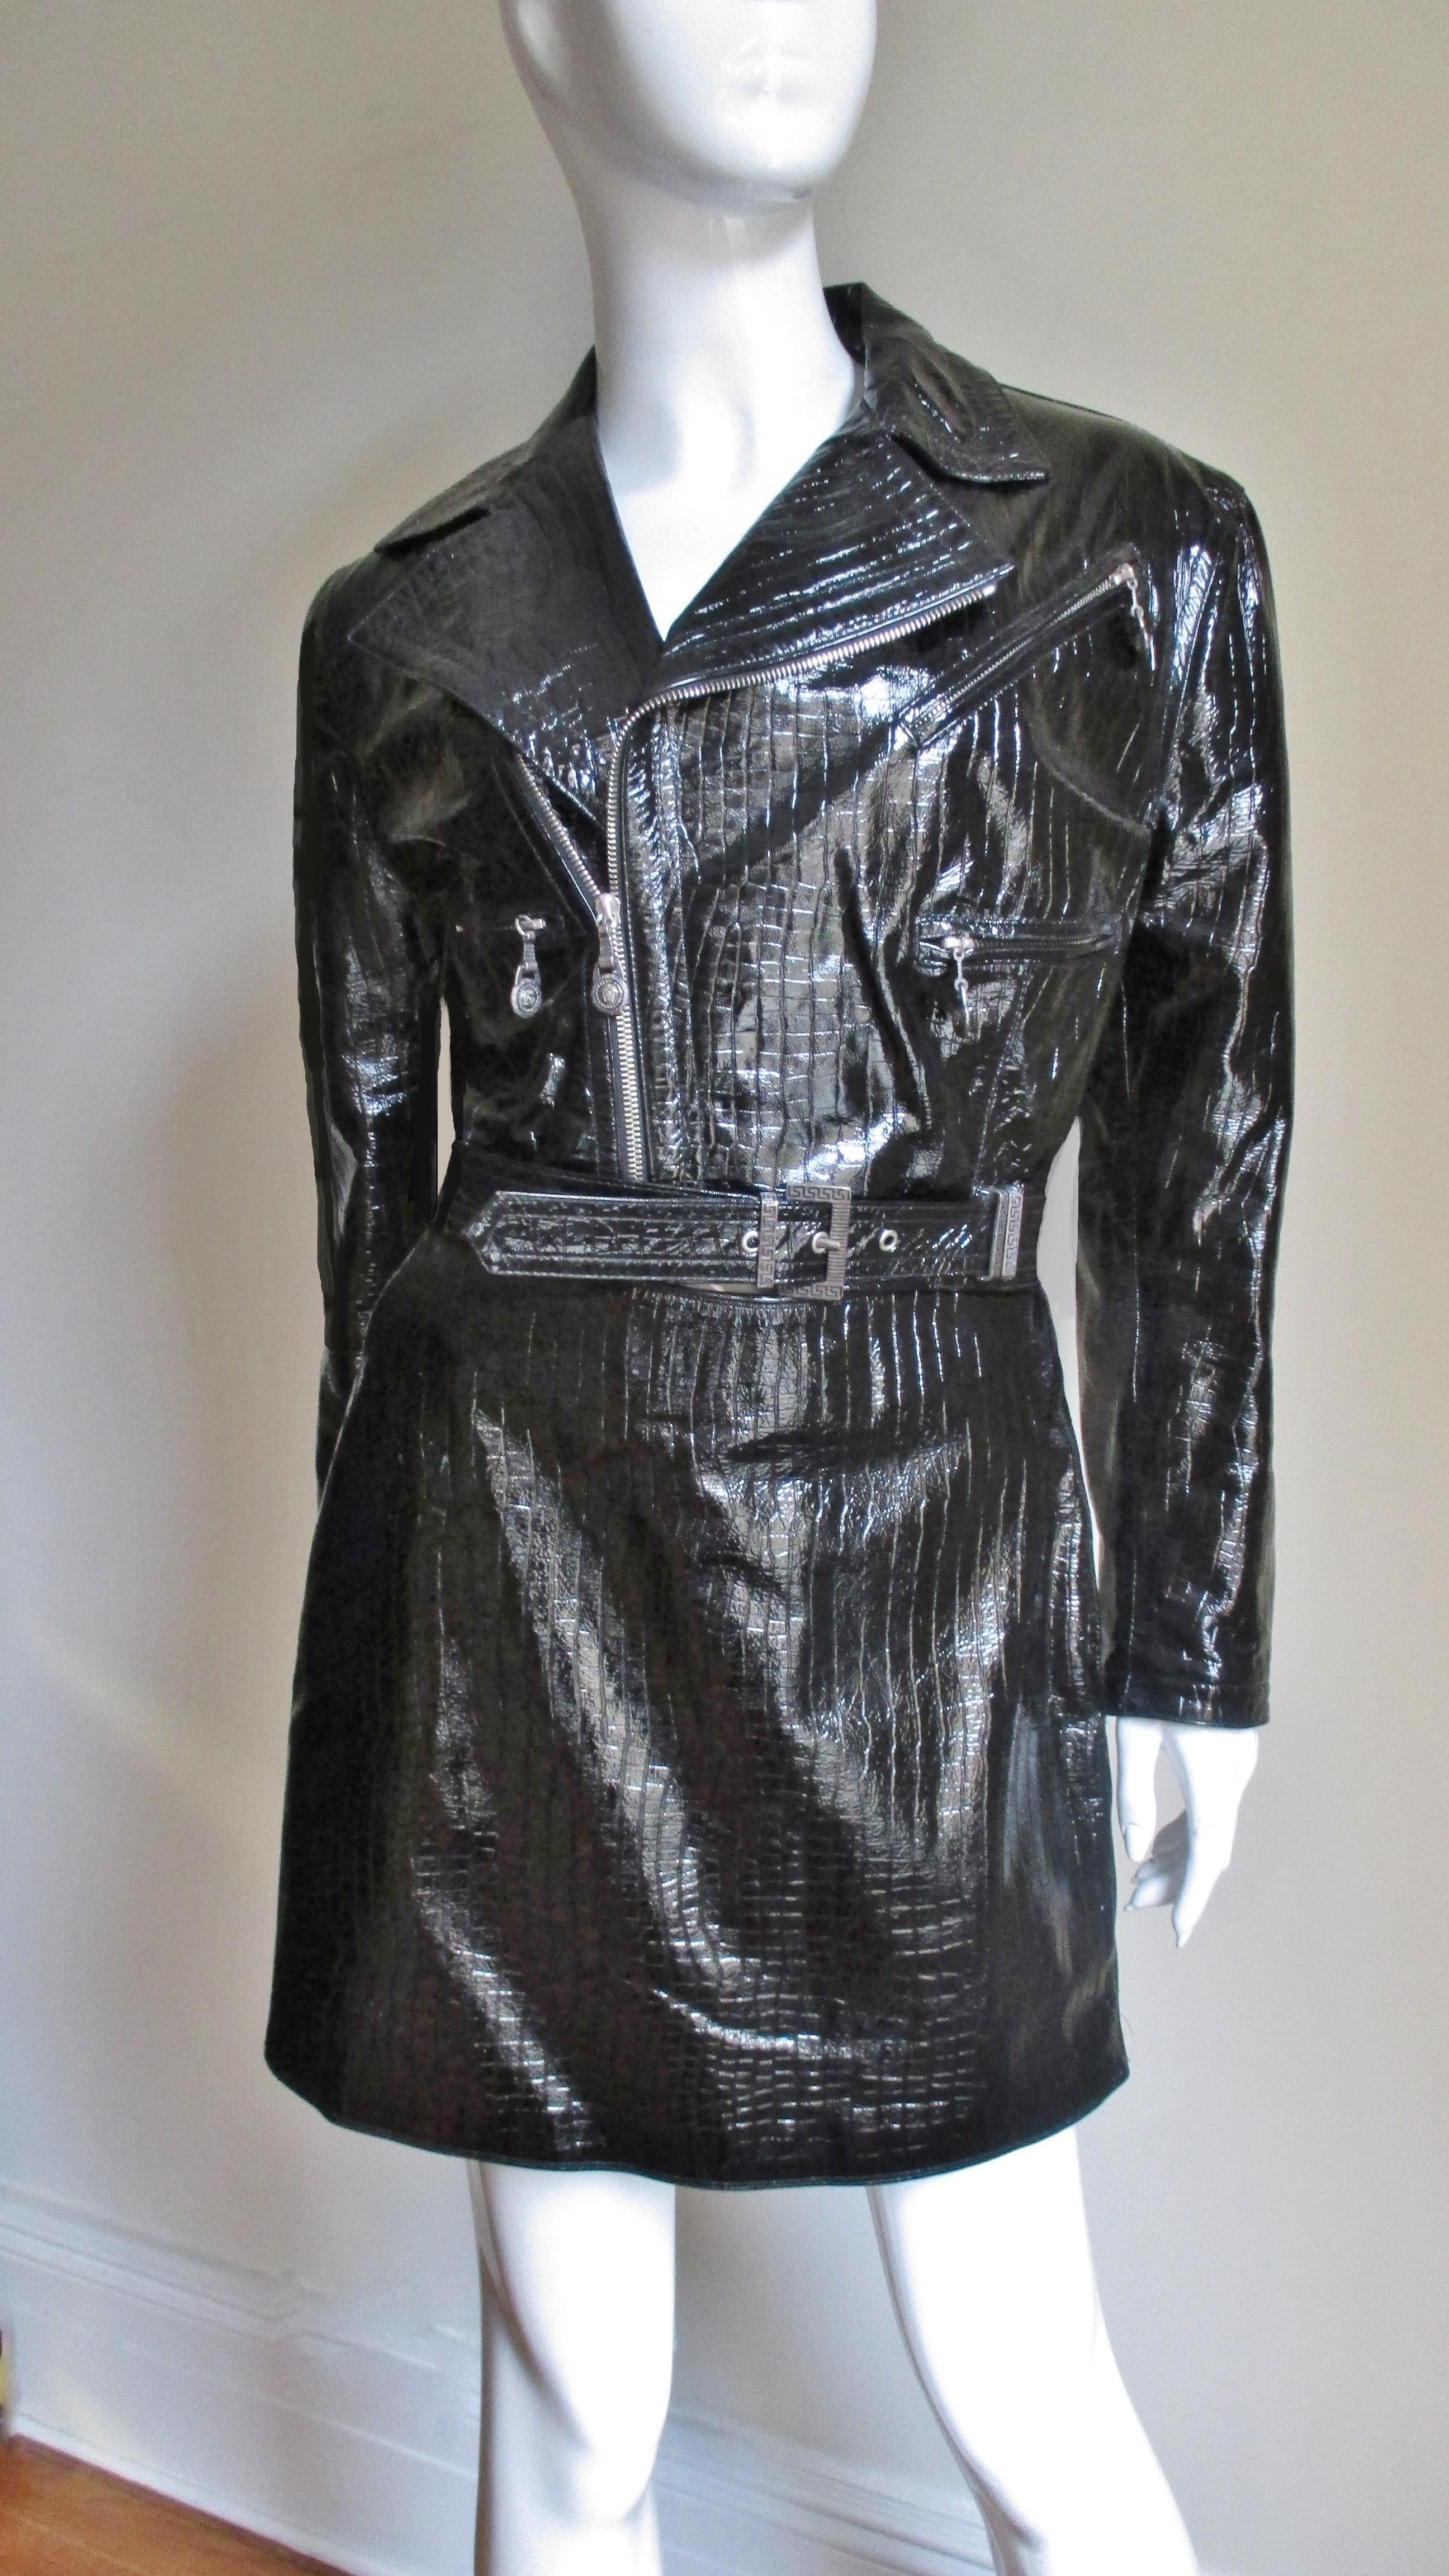 Black 1990s Gianni Versace Patent Leather Motorcycle Jacket and Skirt